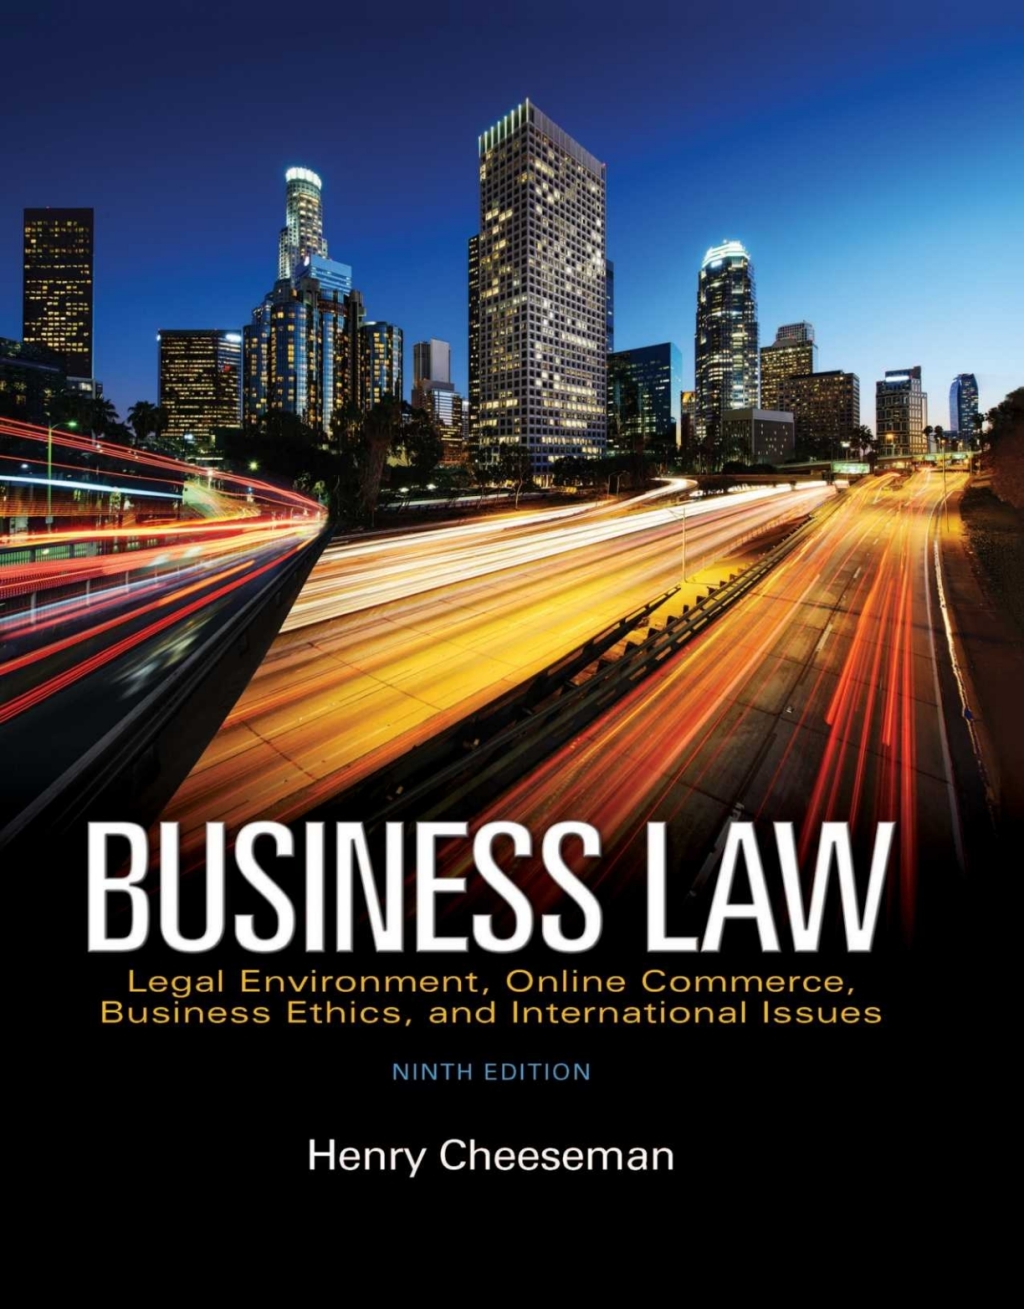 Business Law (eBook) - Henry R. Cheeseman